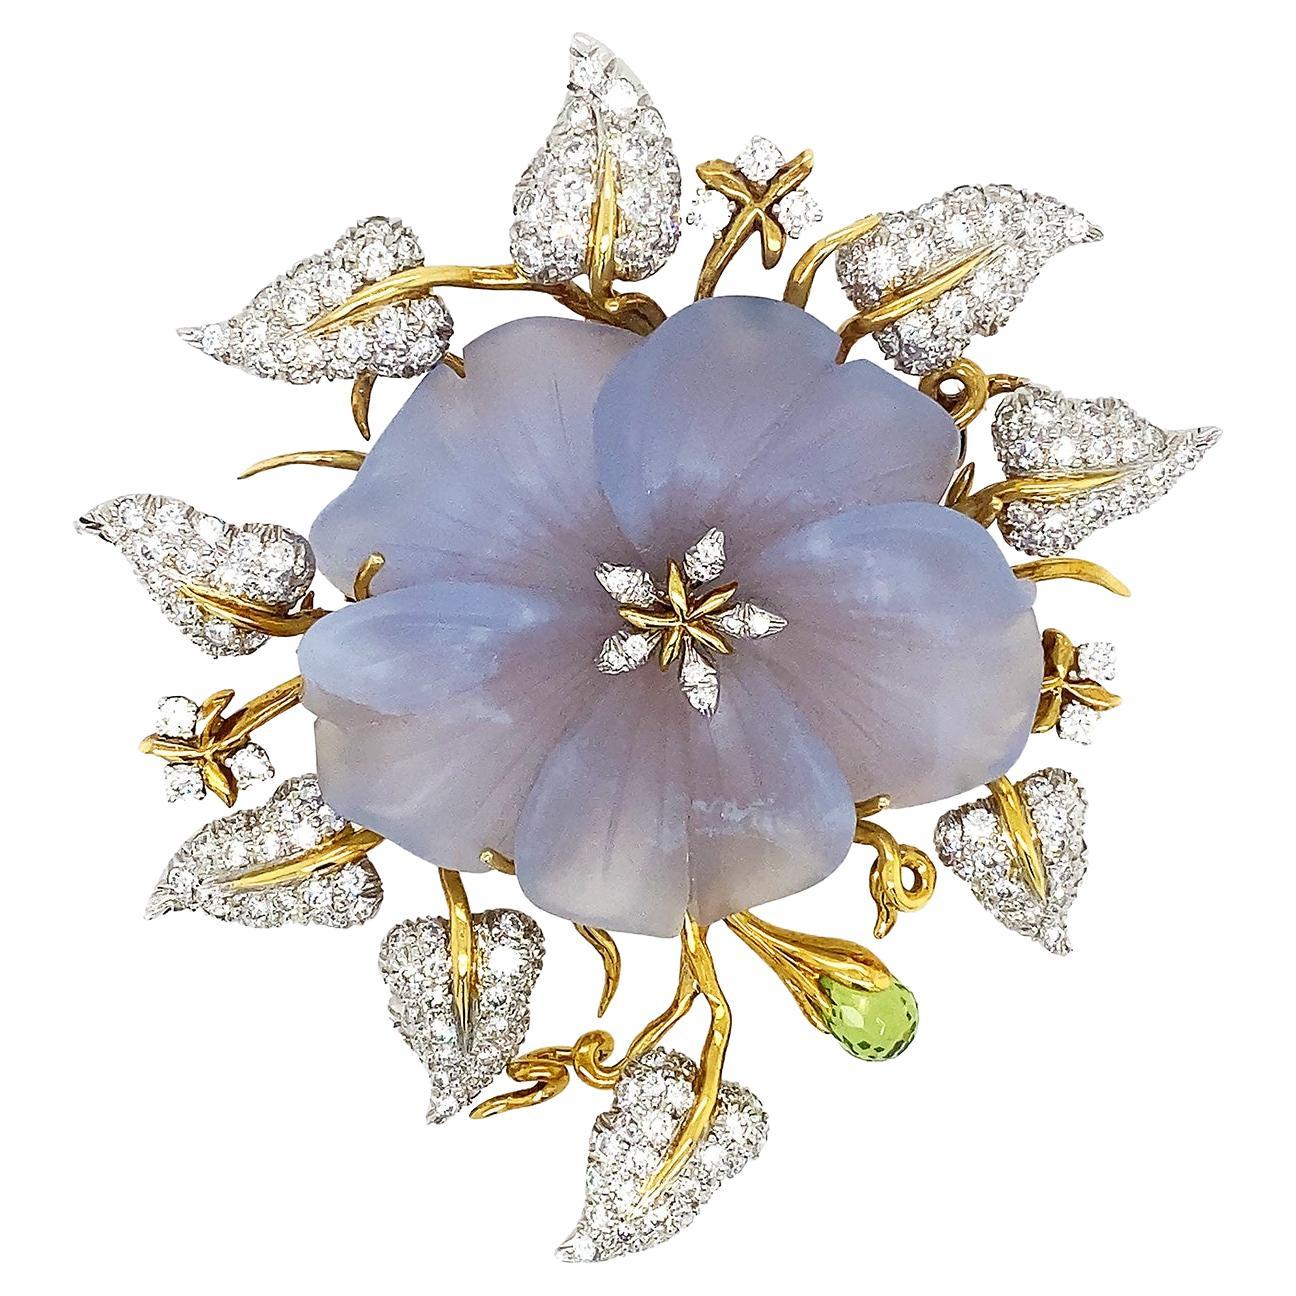 Carved Chalcedony Flower Diamond 18K Yellow Gold Brooch